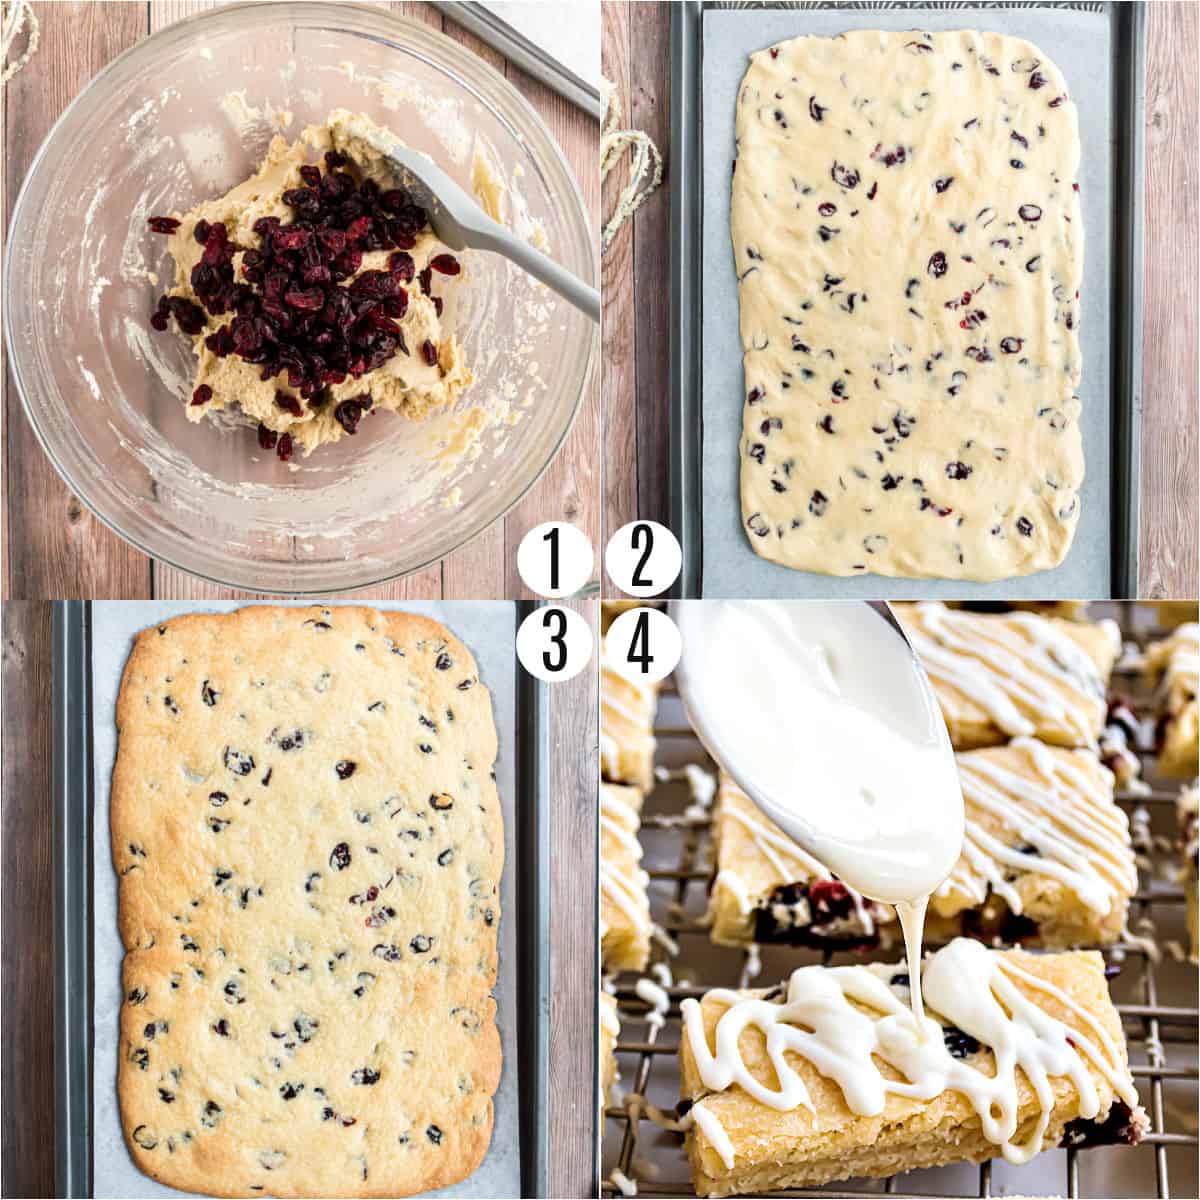 Step by step photos showing how to make shortbread bars with craisins.